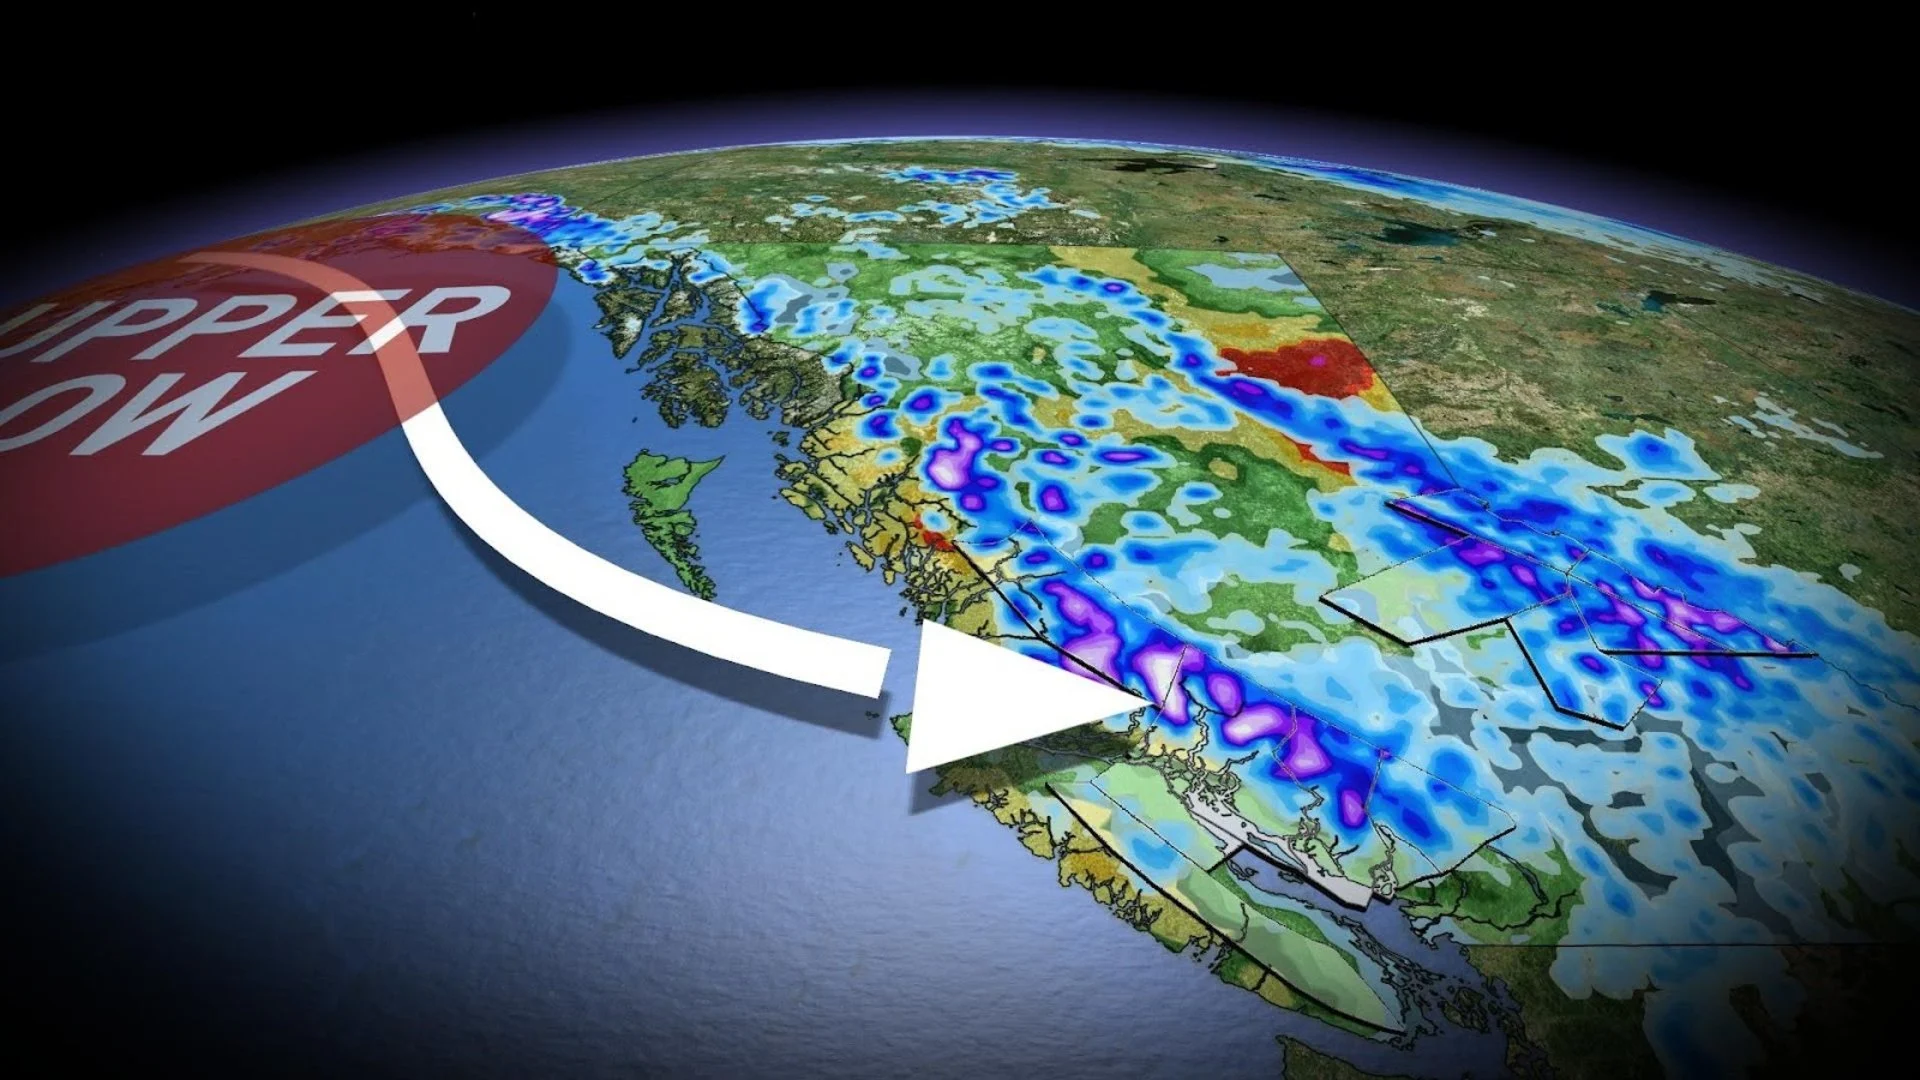 Summer takes a vacation as gloomy chill, snow descends on B.C. See what's coming, here